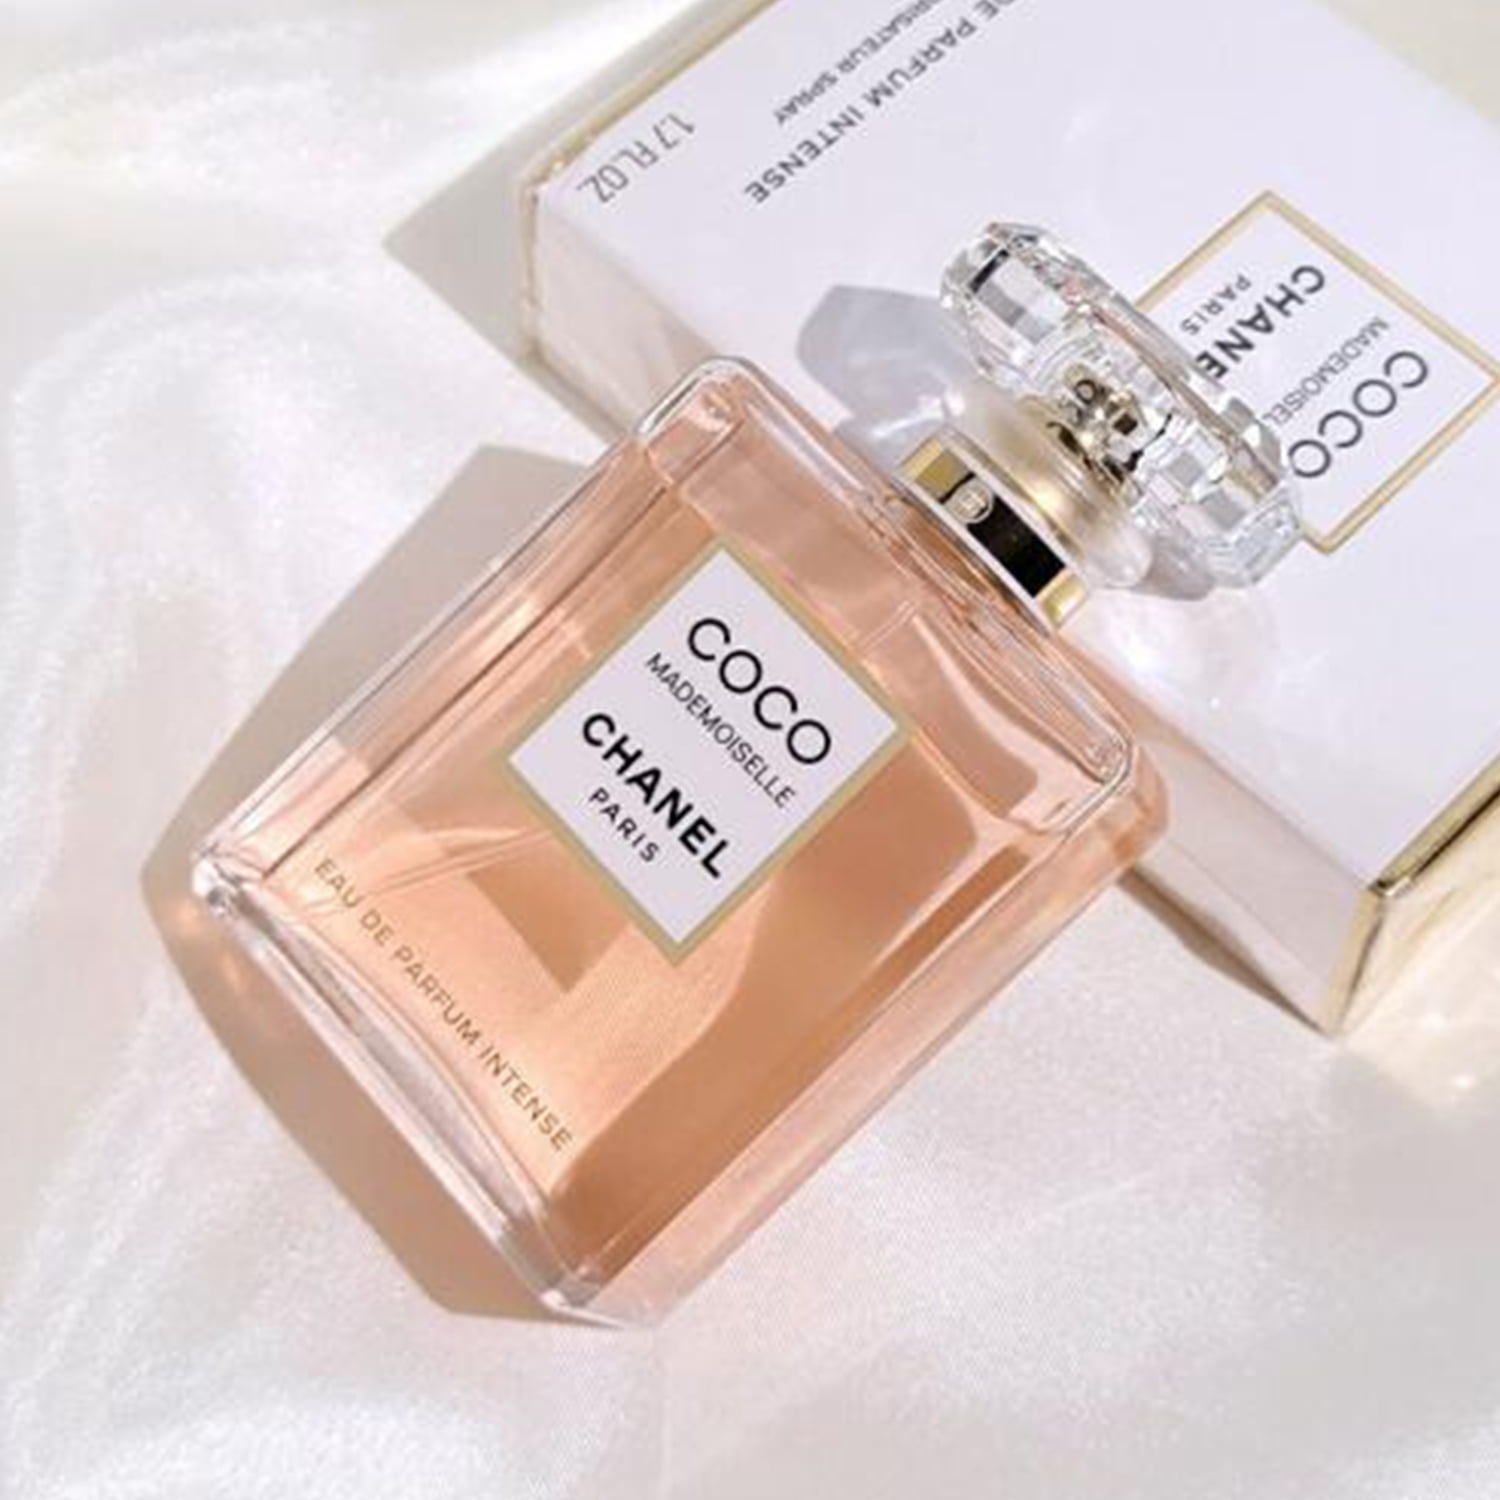 chanel fragrance coco mademoiselle